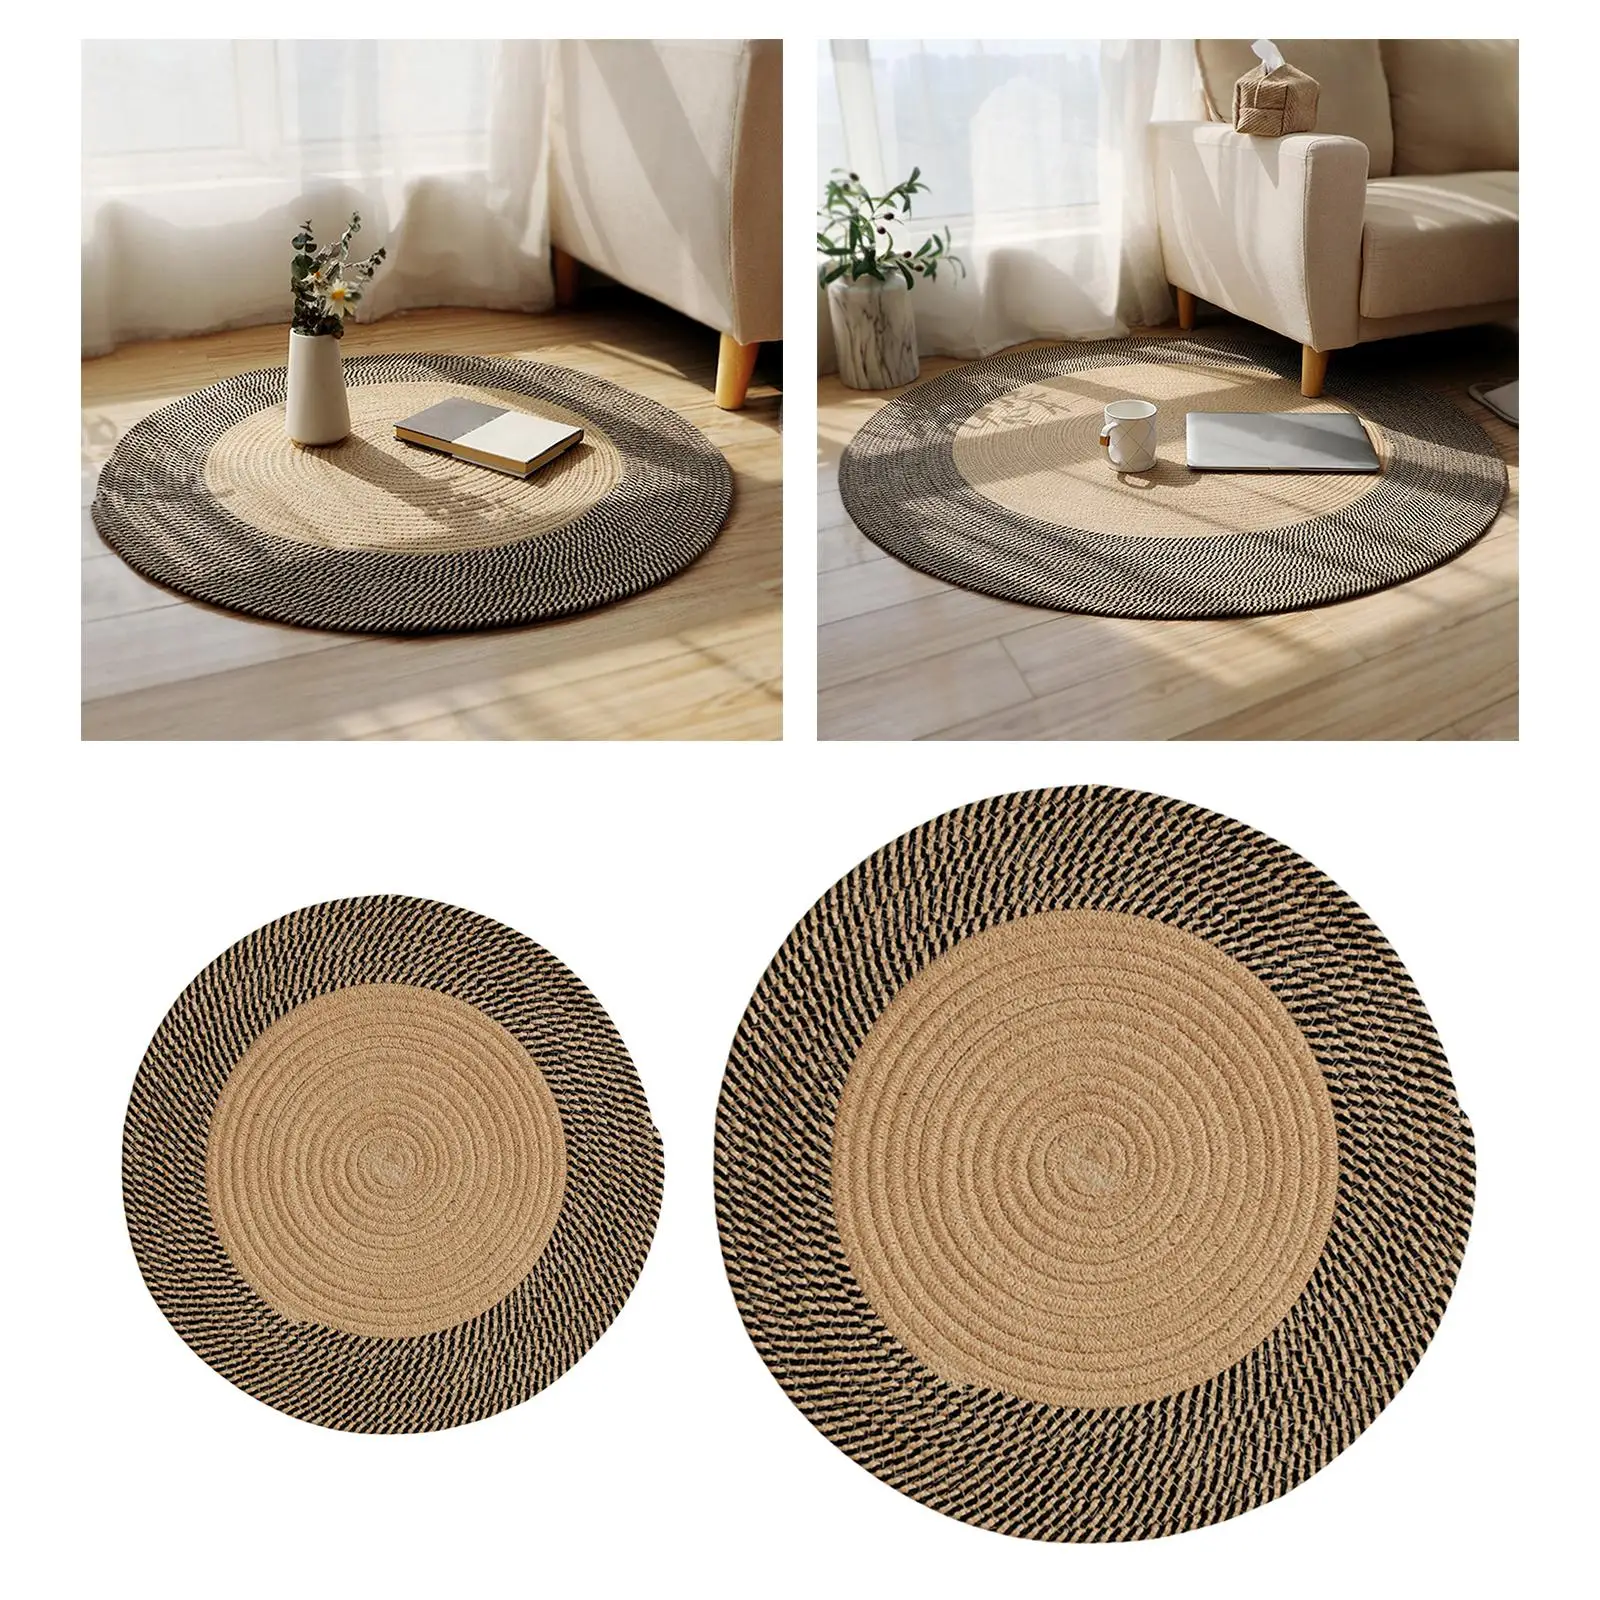 Round Handwoven Jute Braided Rug Reversible Area Rugs for Bedroom Home Decor